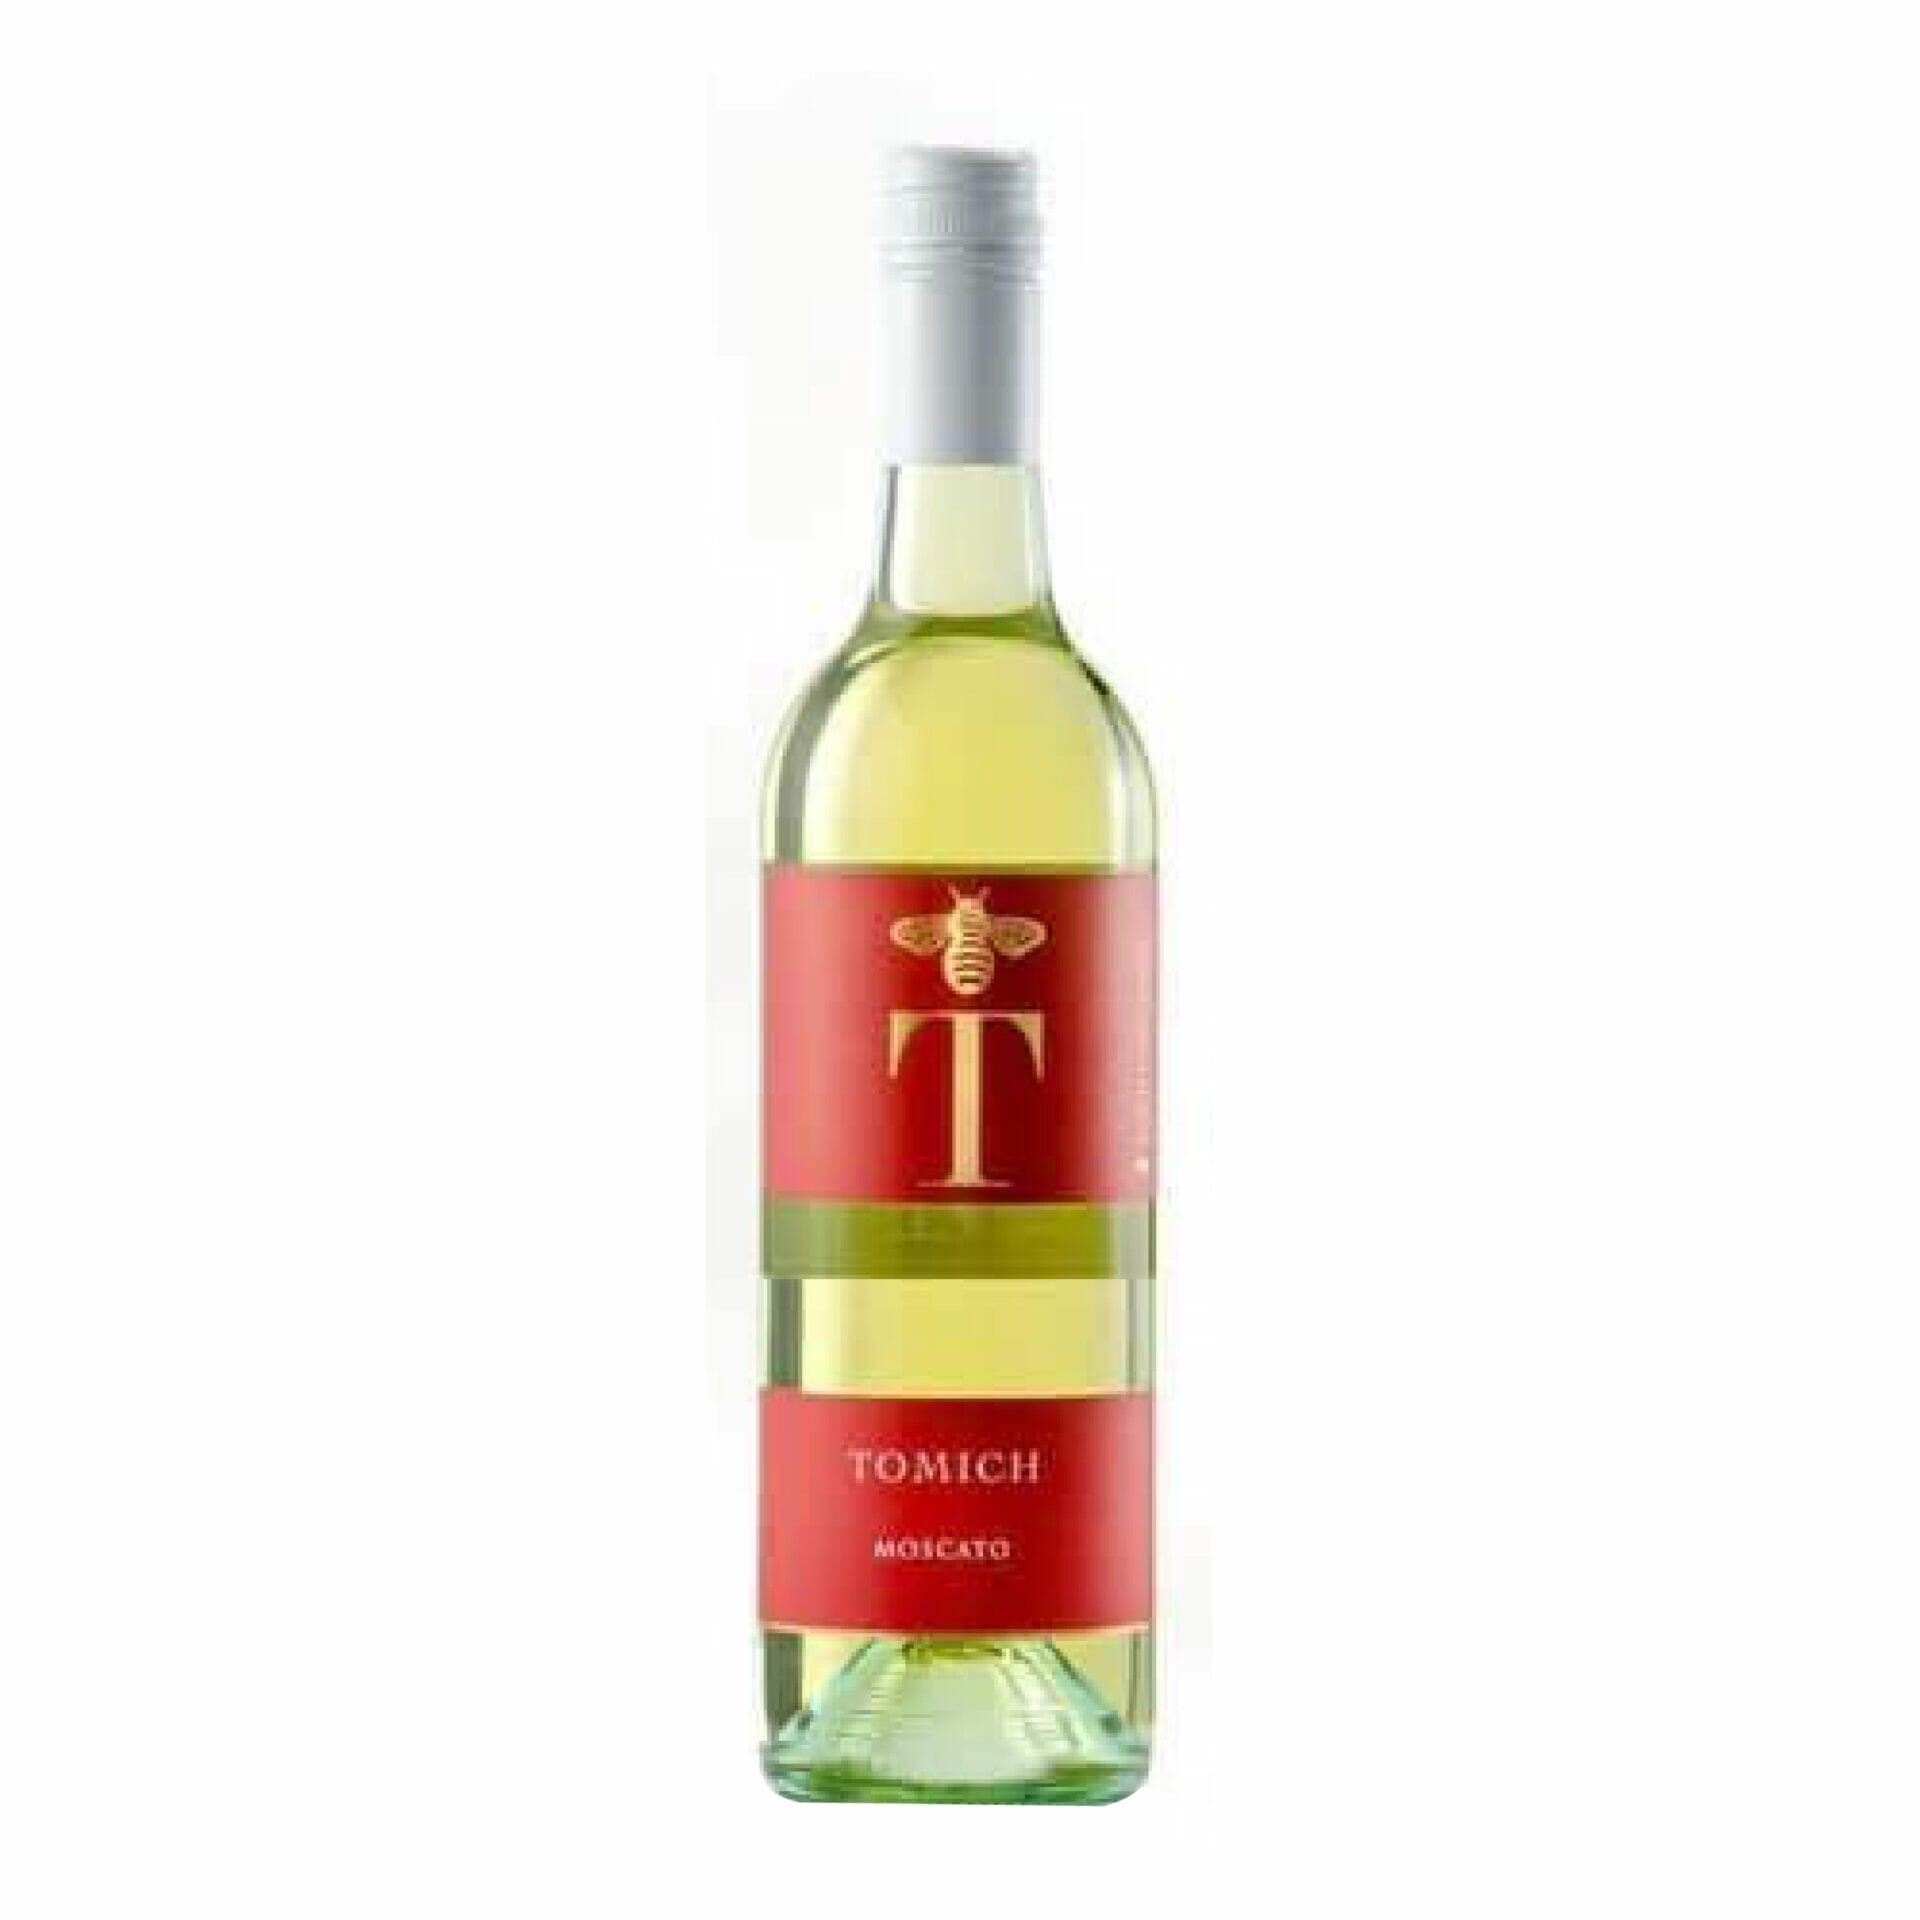 Tomich Moscato 750ml 01